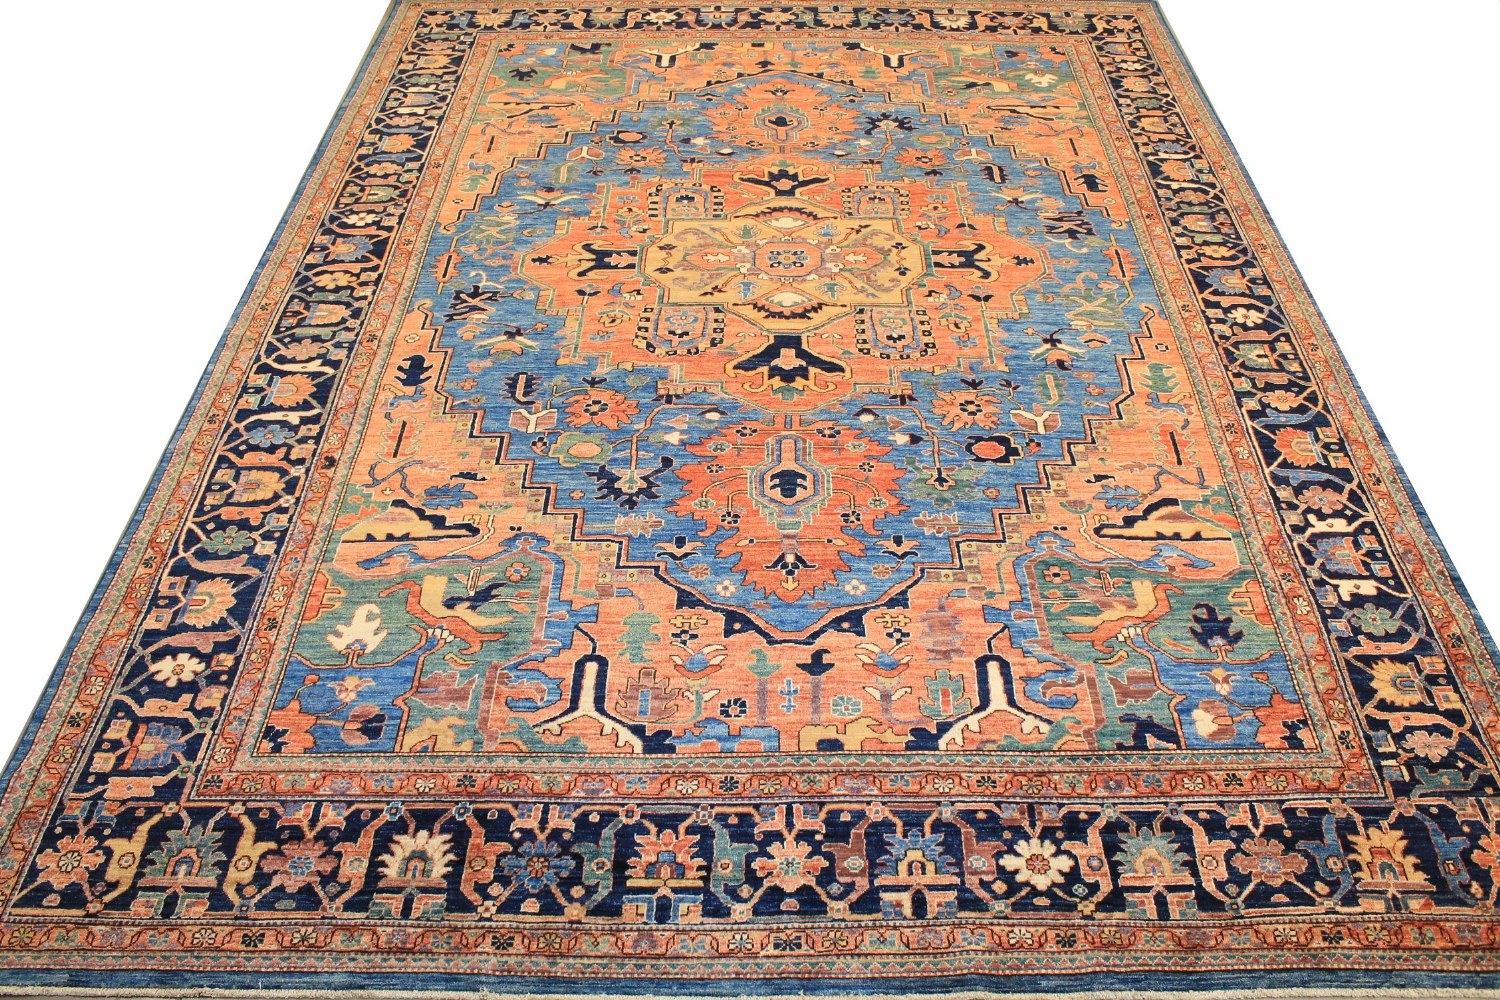 10x14 Aryana & Antique Revivals Hand Knotted Wool Area Rug - MR027249